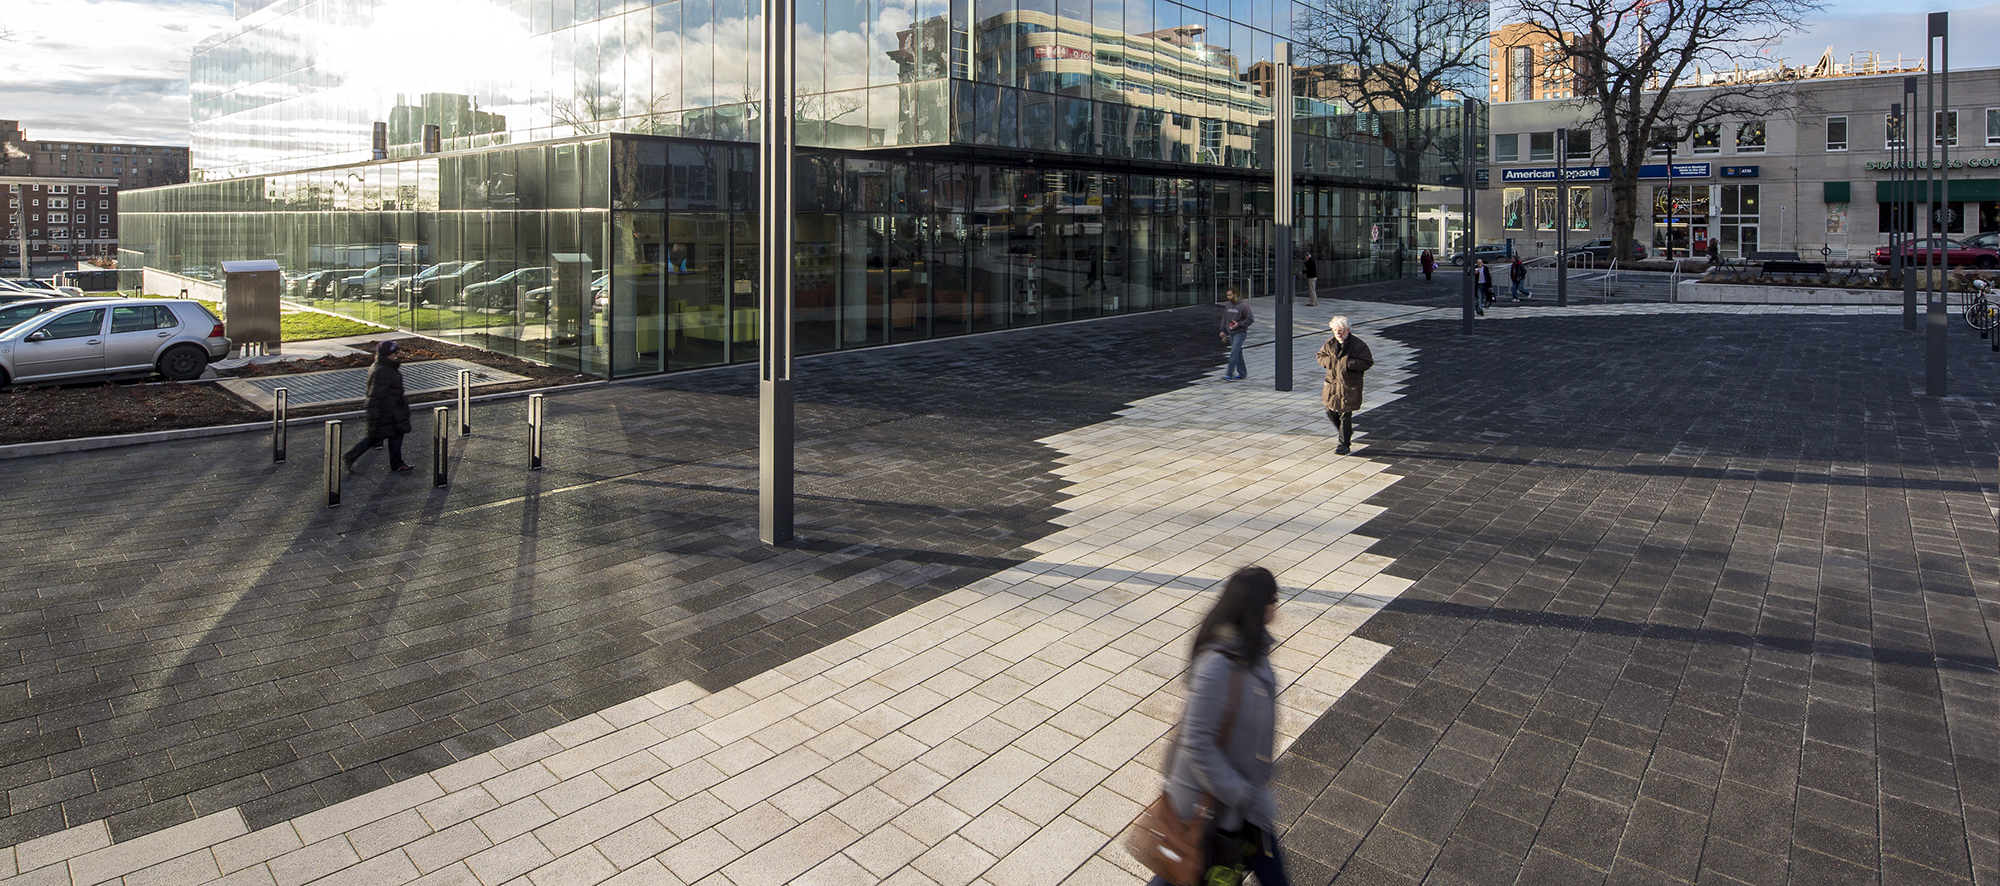 As visitors pass various garden islands with benches, black Series pavers highlight the Halifax library's contemporary glass architecture.